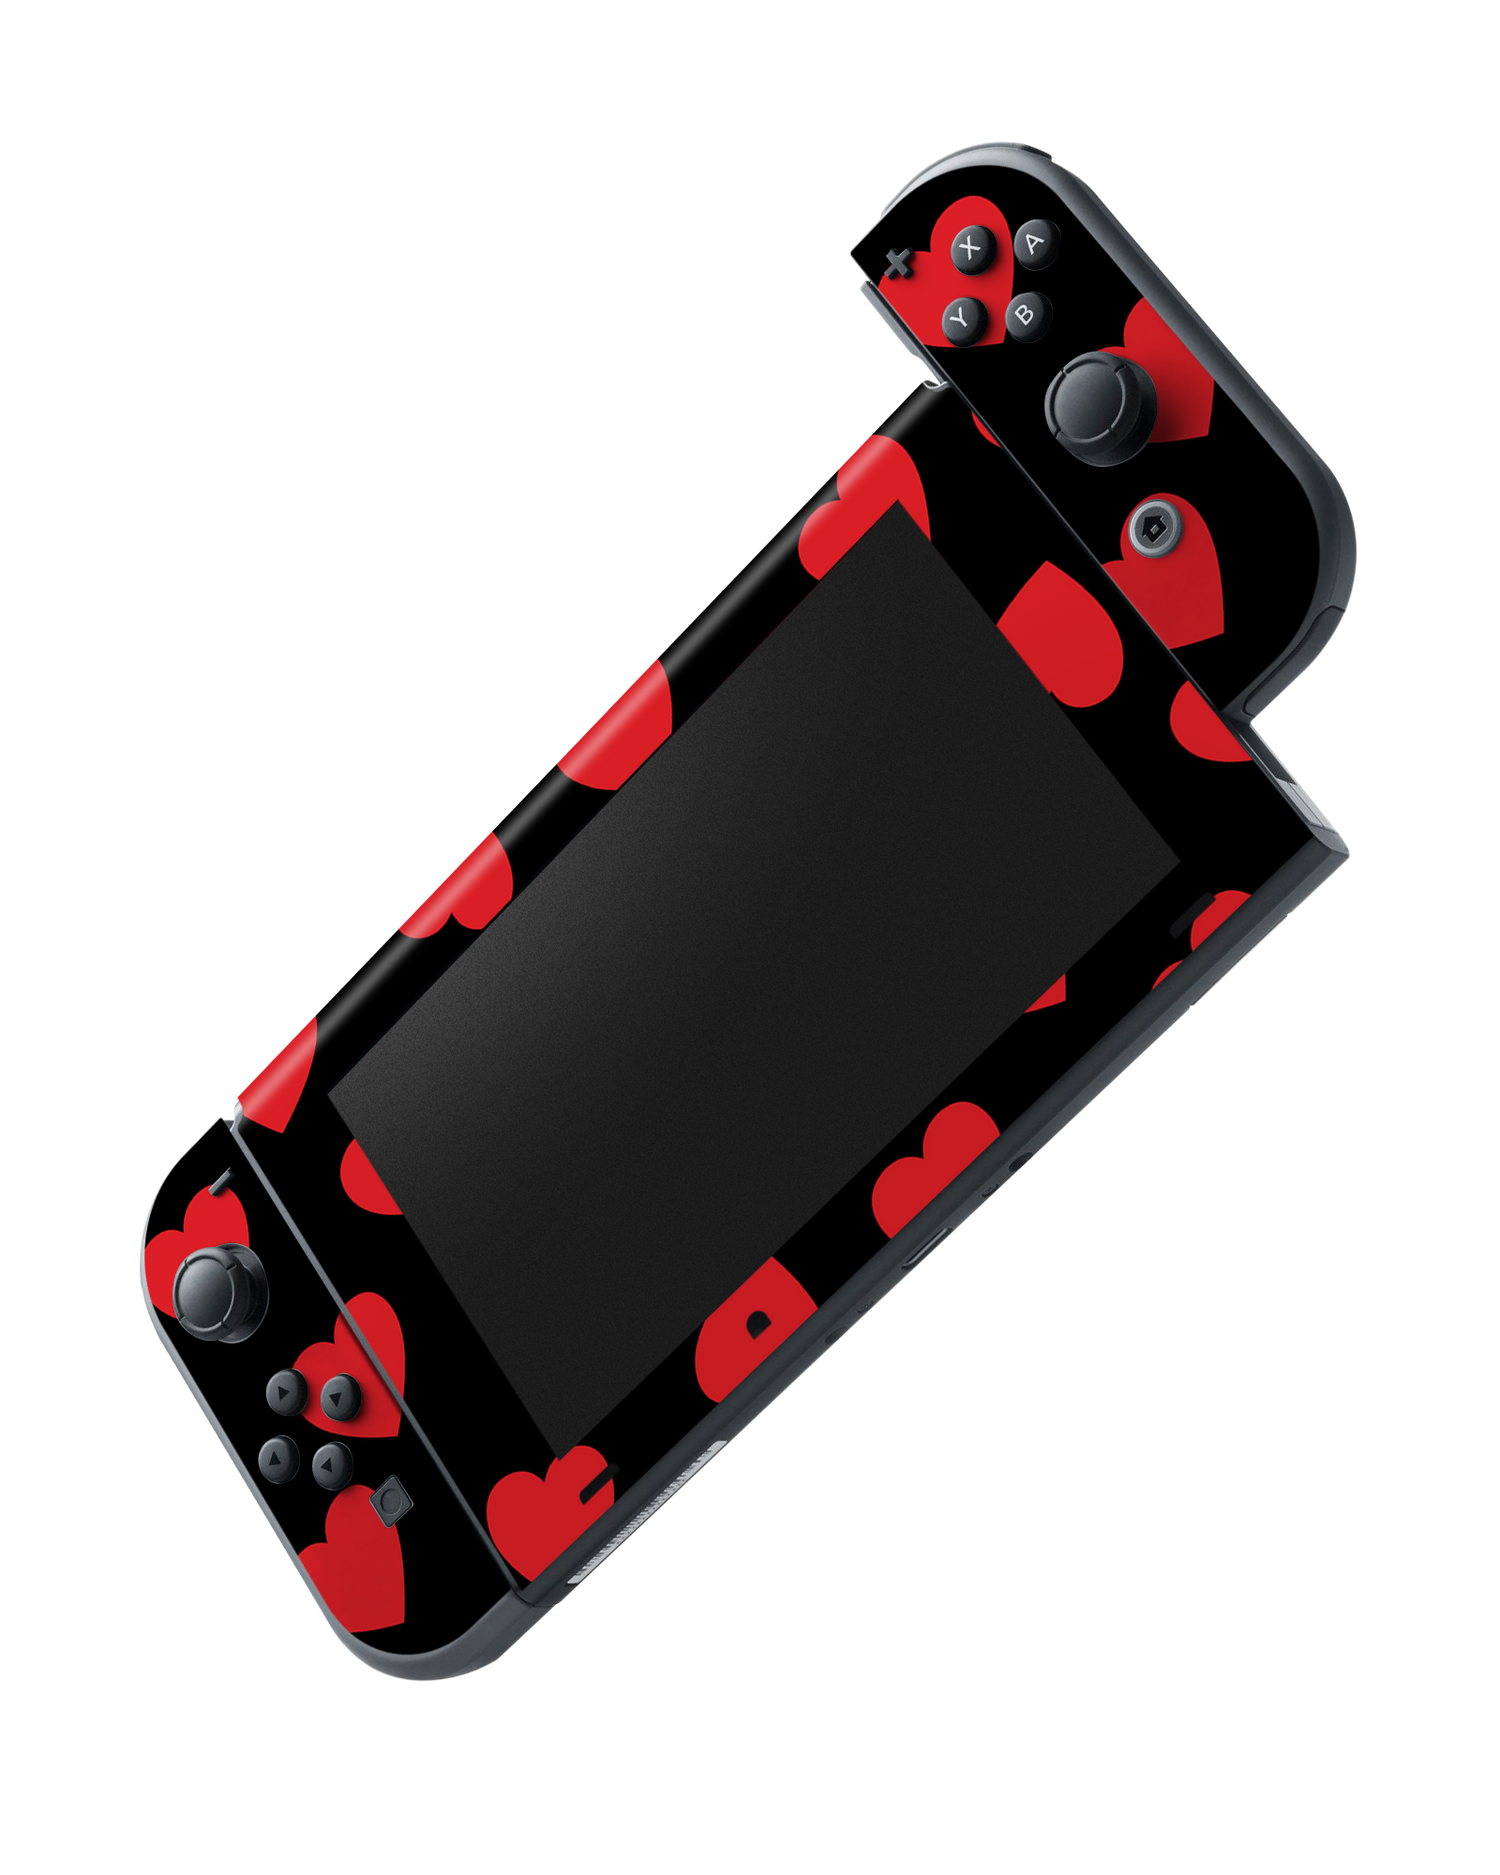 Repeating Hearts Console Skin for Nintendo Switch: Joy-Con removing 